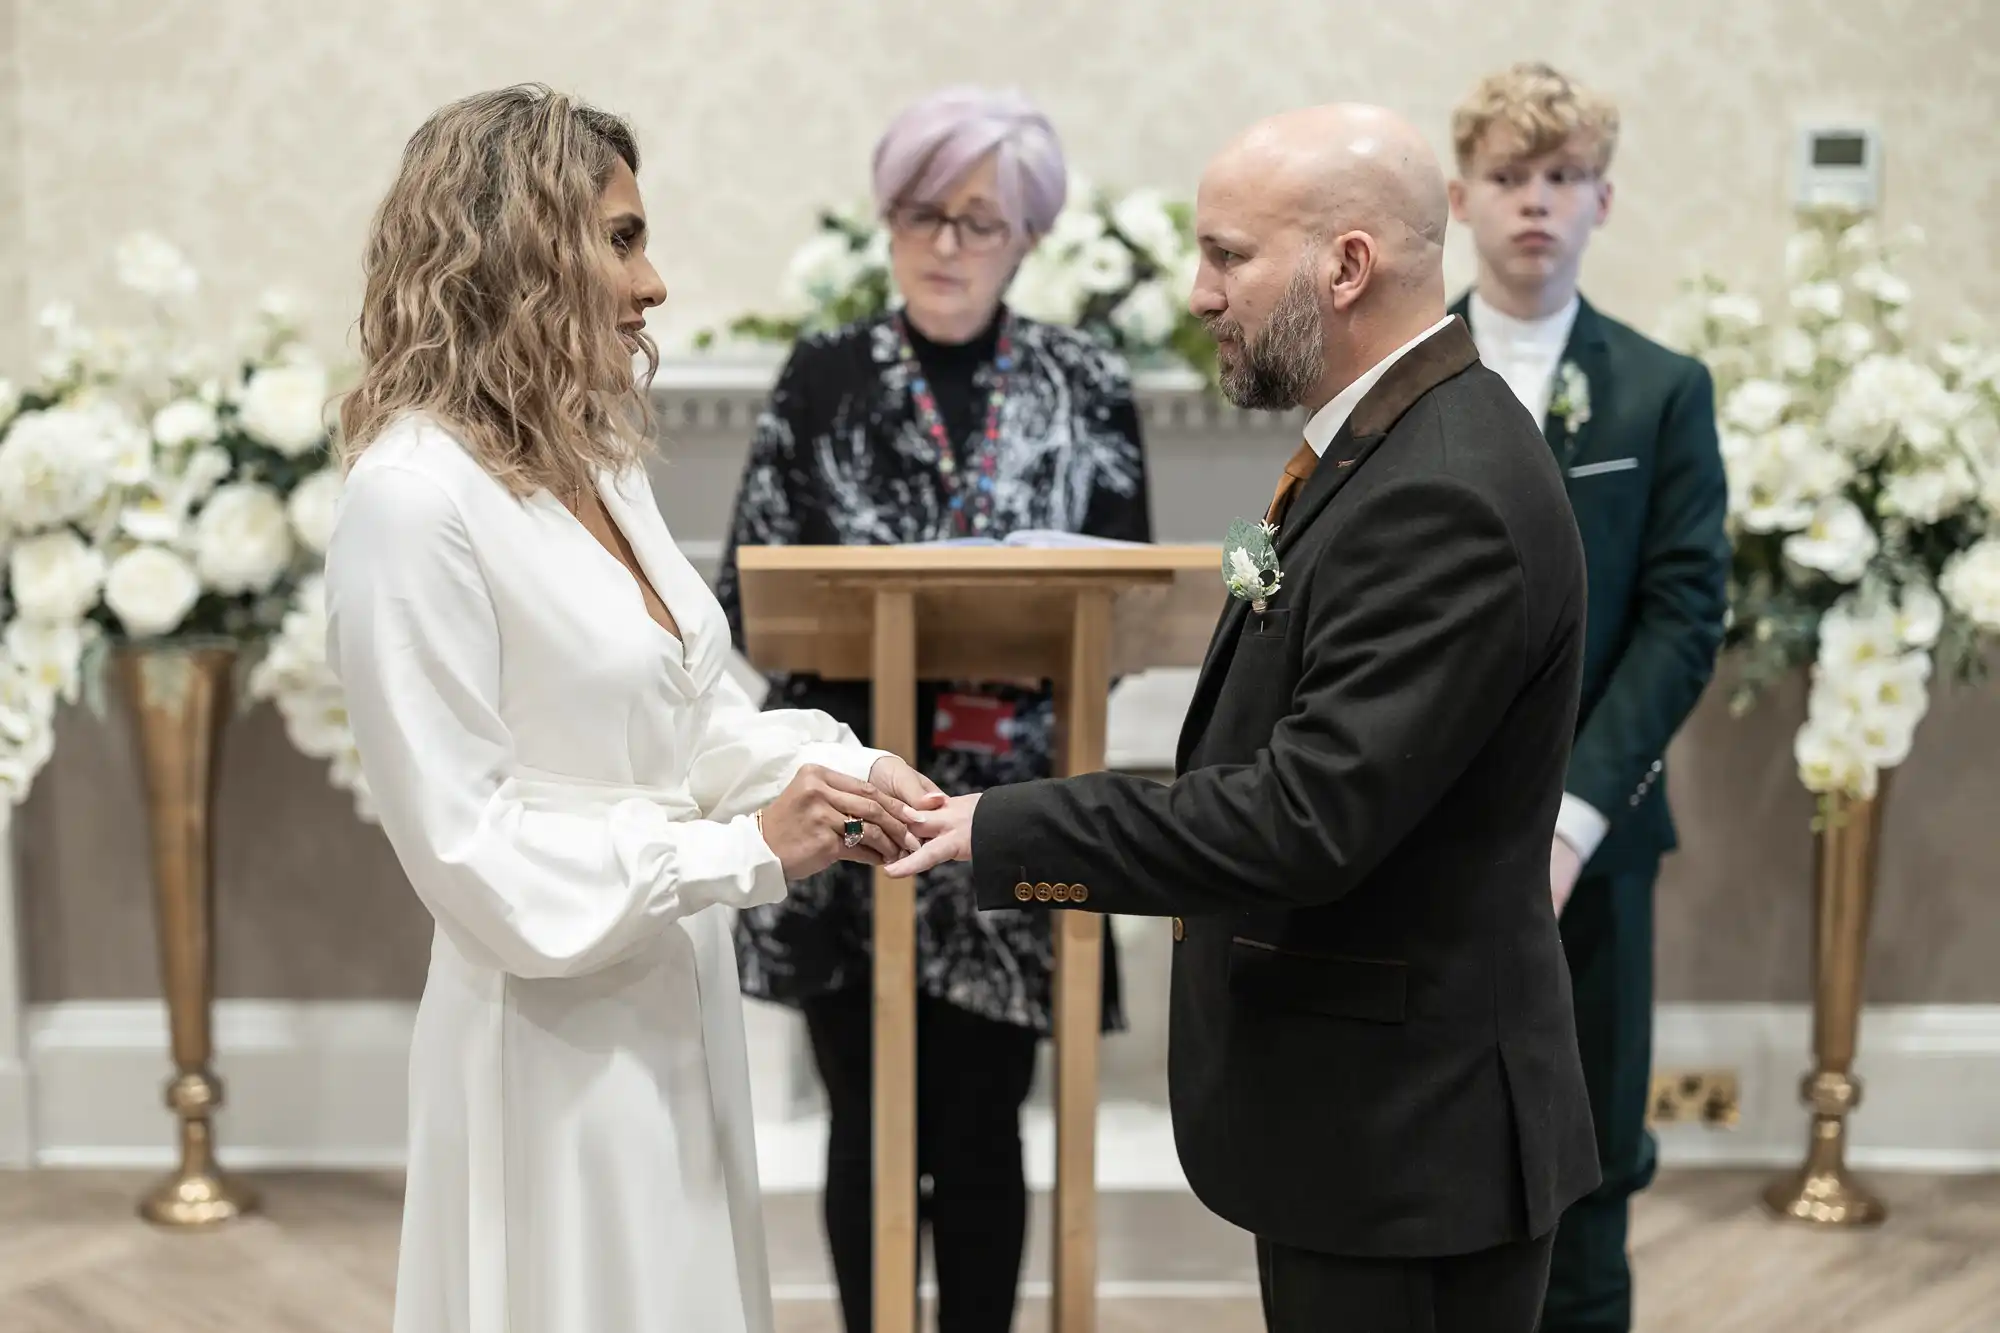 A couple stands exchanging rings during a wedding ceremony, with an officiant and a young boy standing behind them amidst flower arrangements.